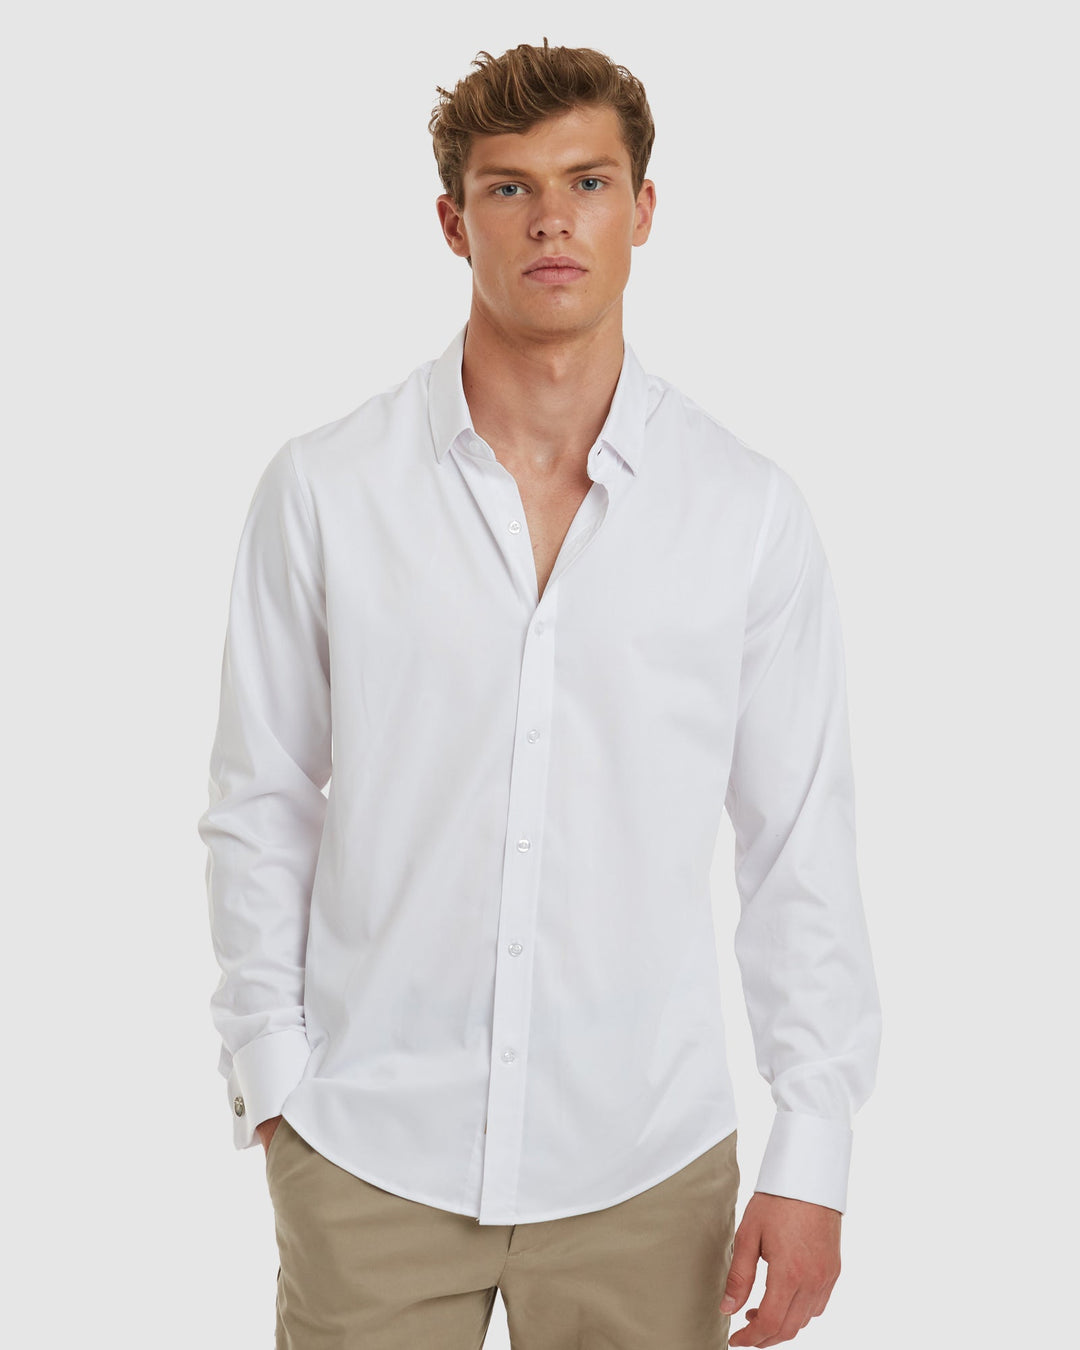 Paris Formal White Shirt with Non Iron Cotton and French Cuffs - Casual Fit